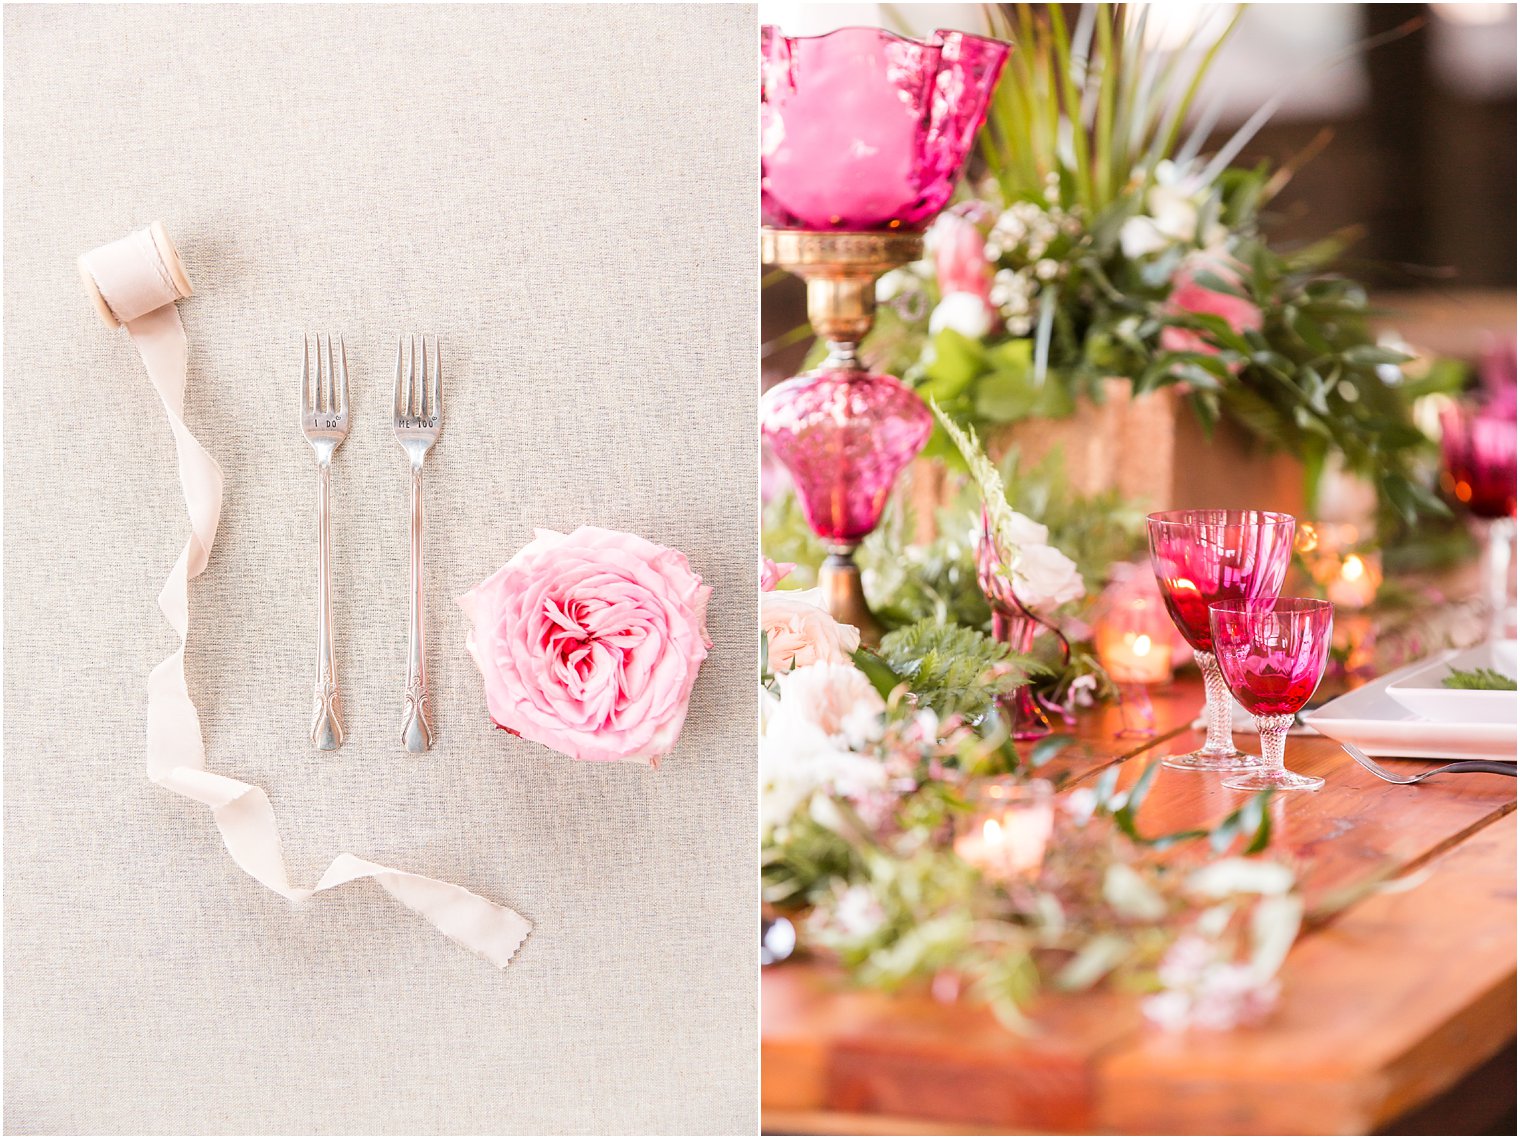 Tablescape with antique pink glass